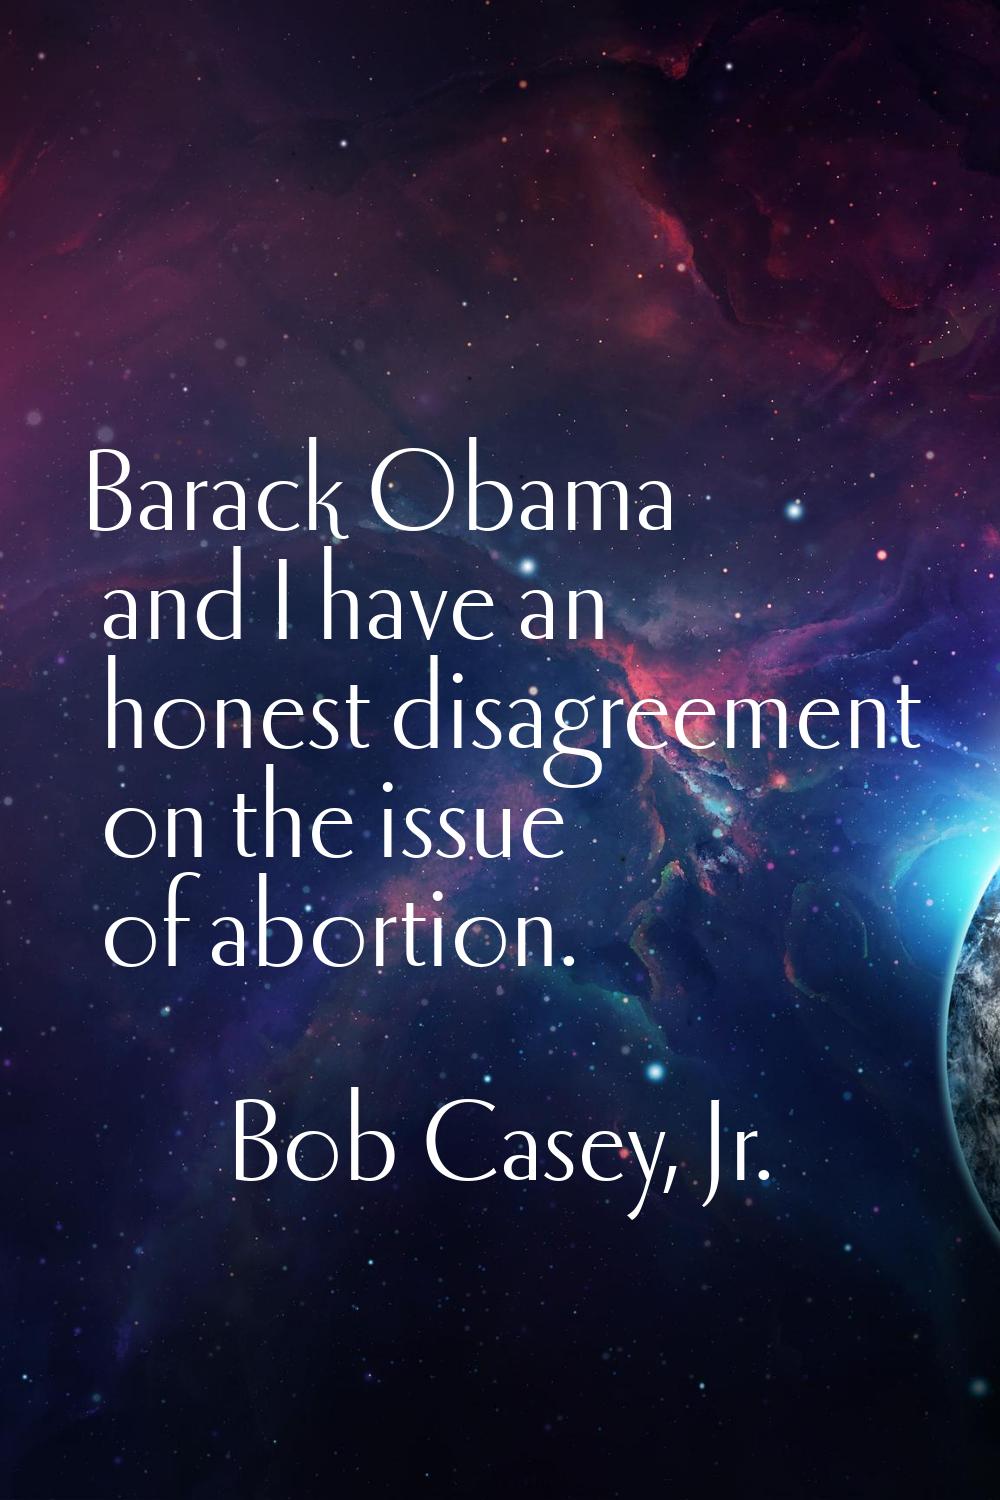 Barack Obama and I have an honest disagreement on the issue of abortion.